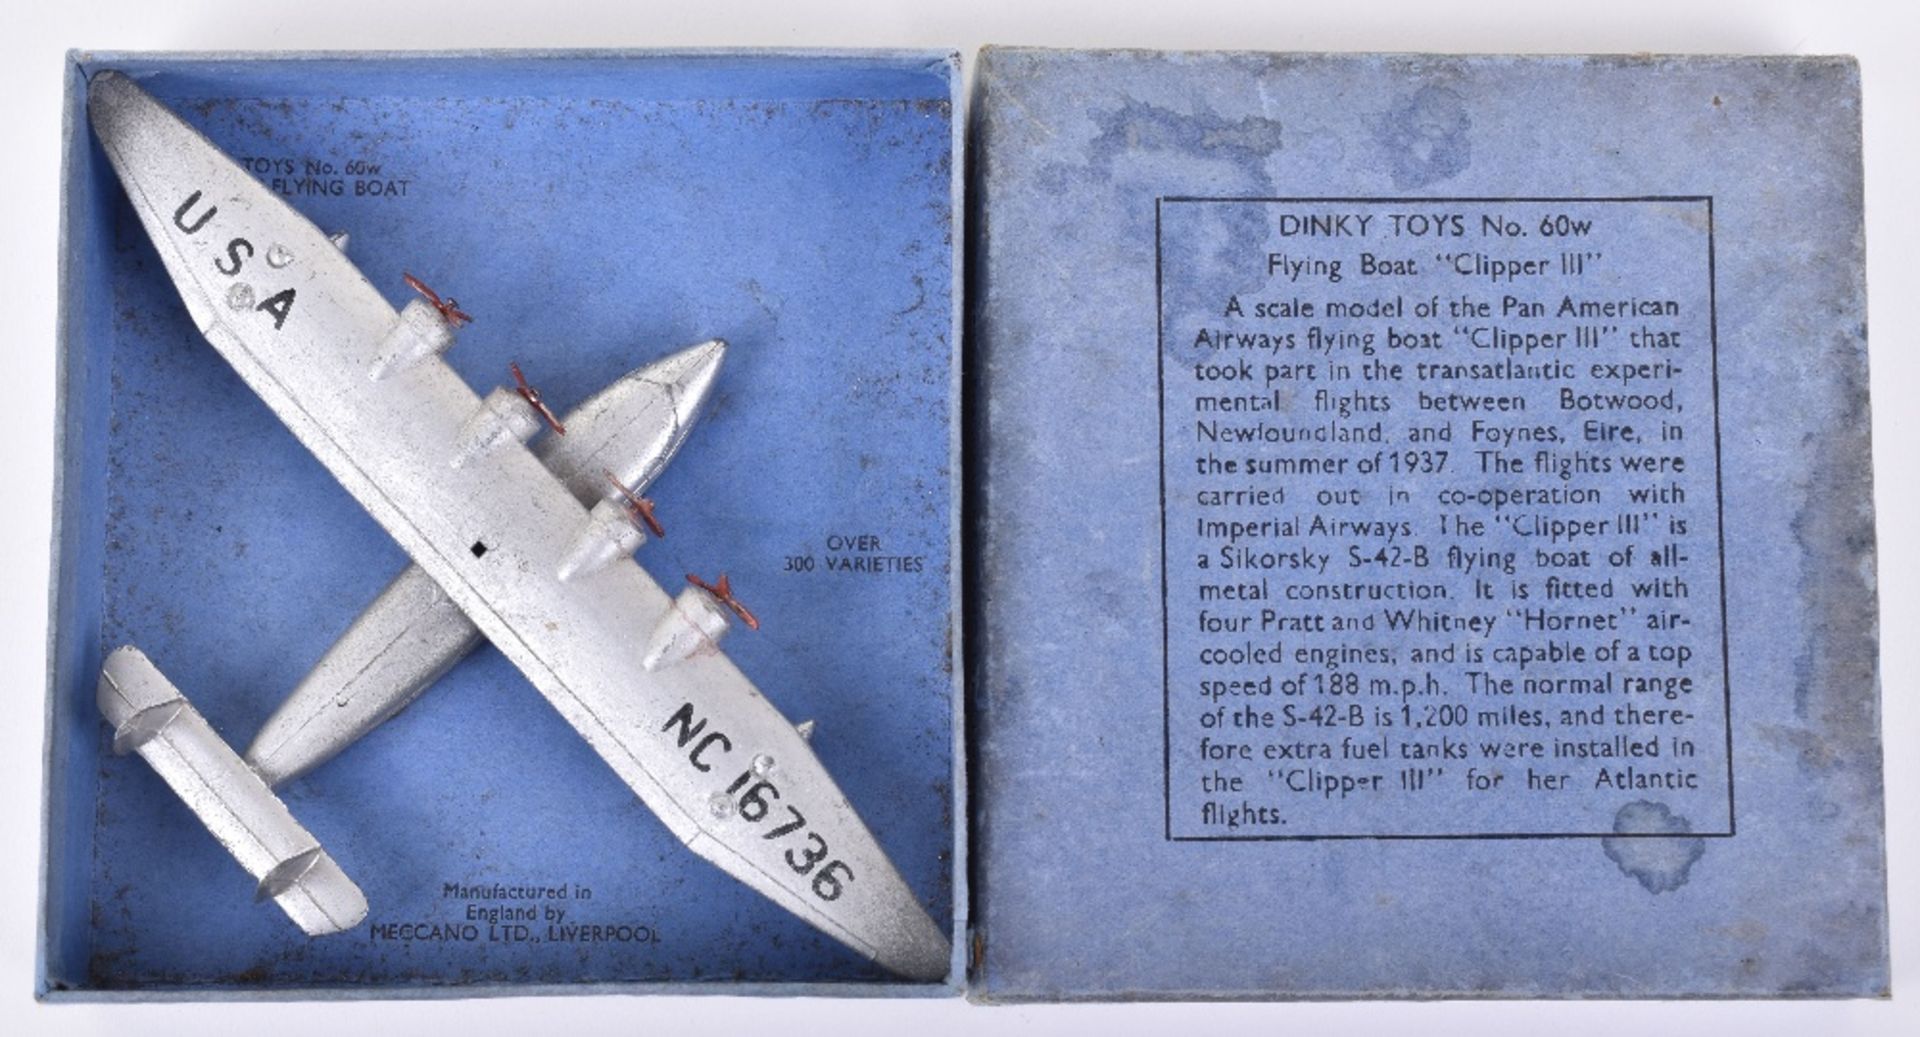 Dinky Toys 60w “Clipper III” Flying Boat - Image 4 of 4